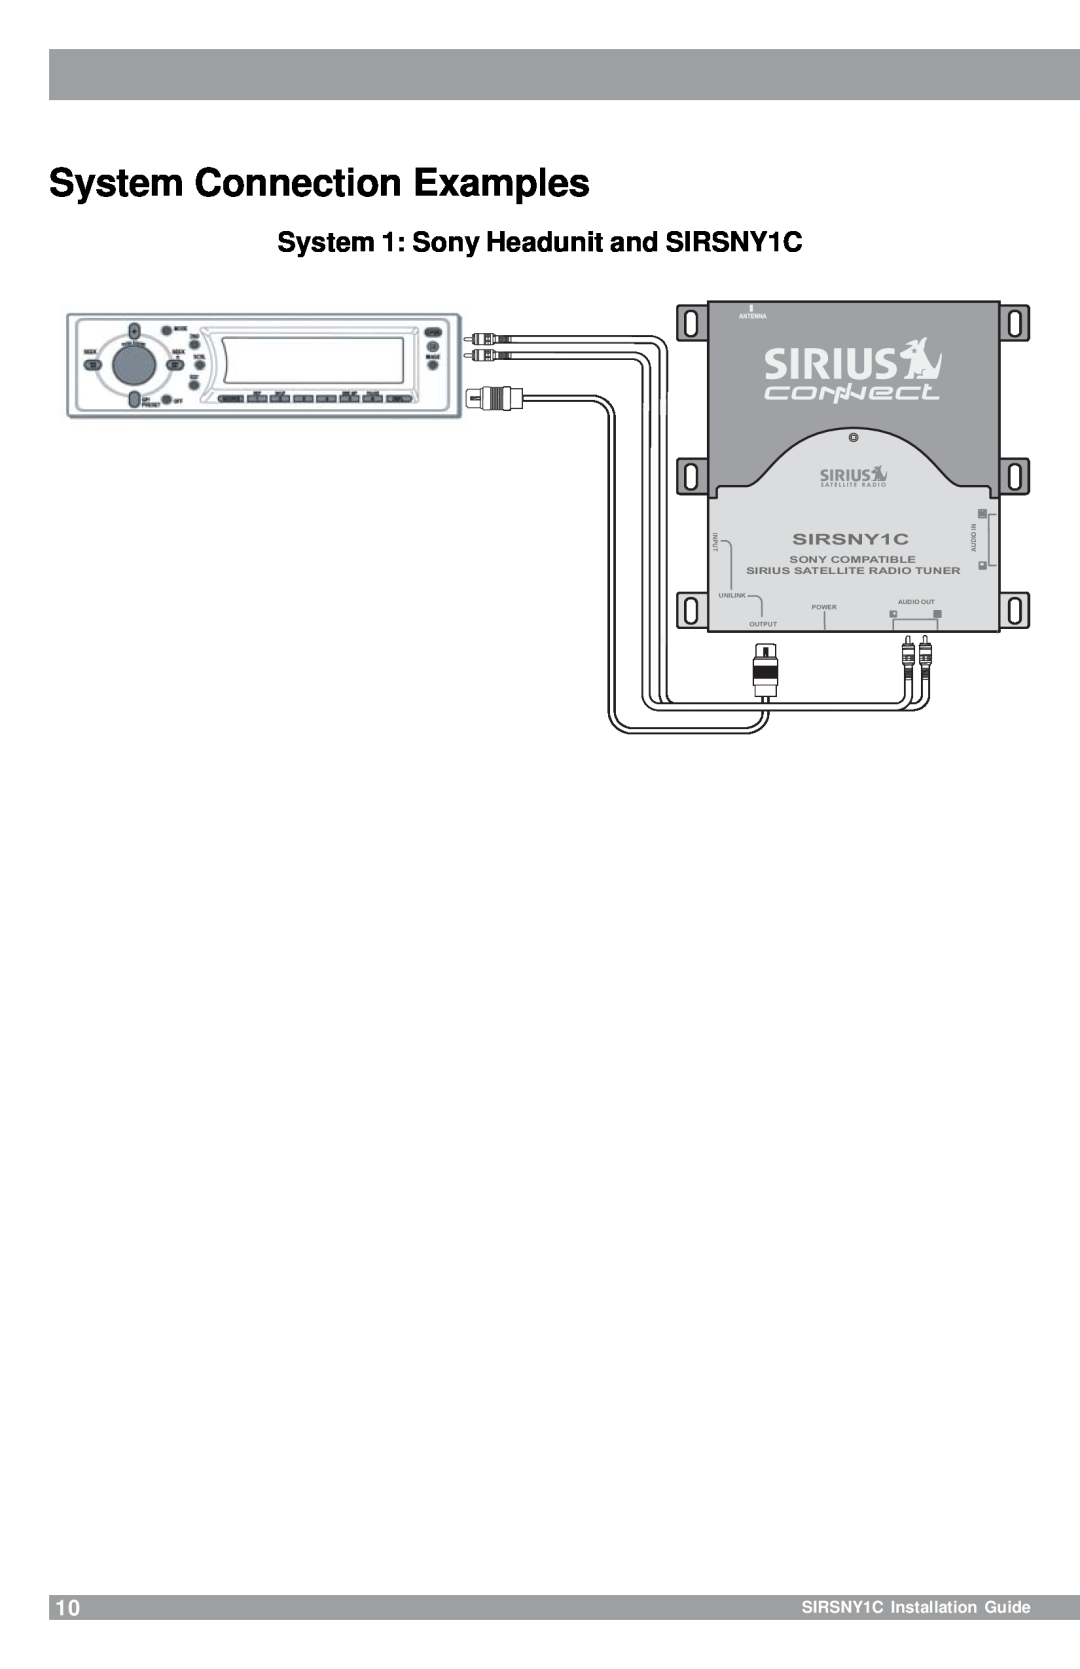 Sirius Satellite Radio System Connection Examples, System 1 Sony Headunit and SIRSNY1C, SIRSNY1C Installation Guide 